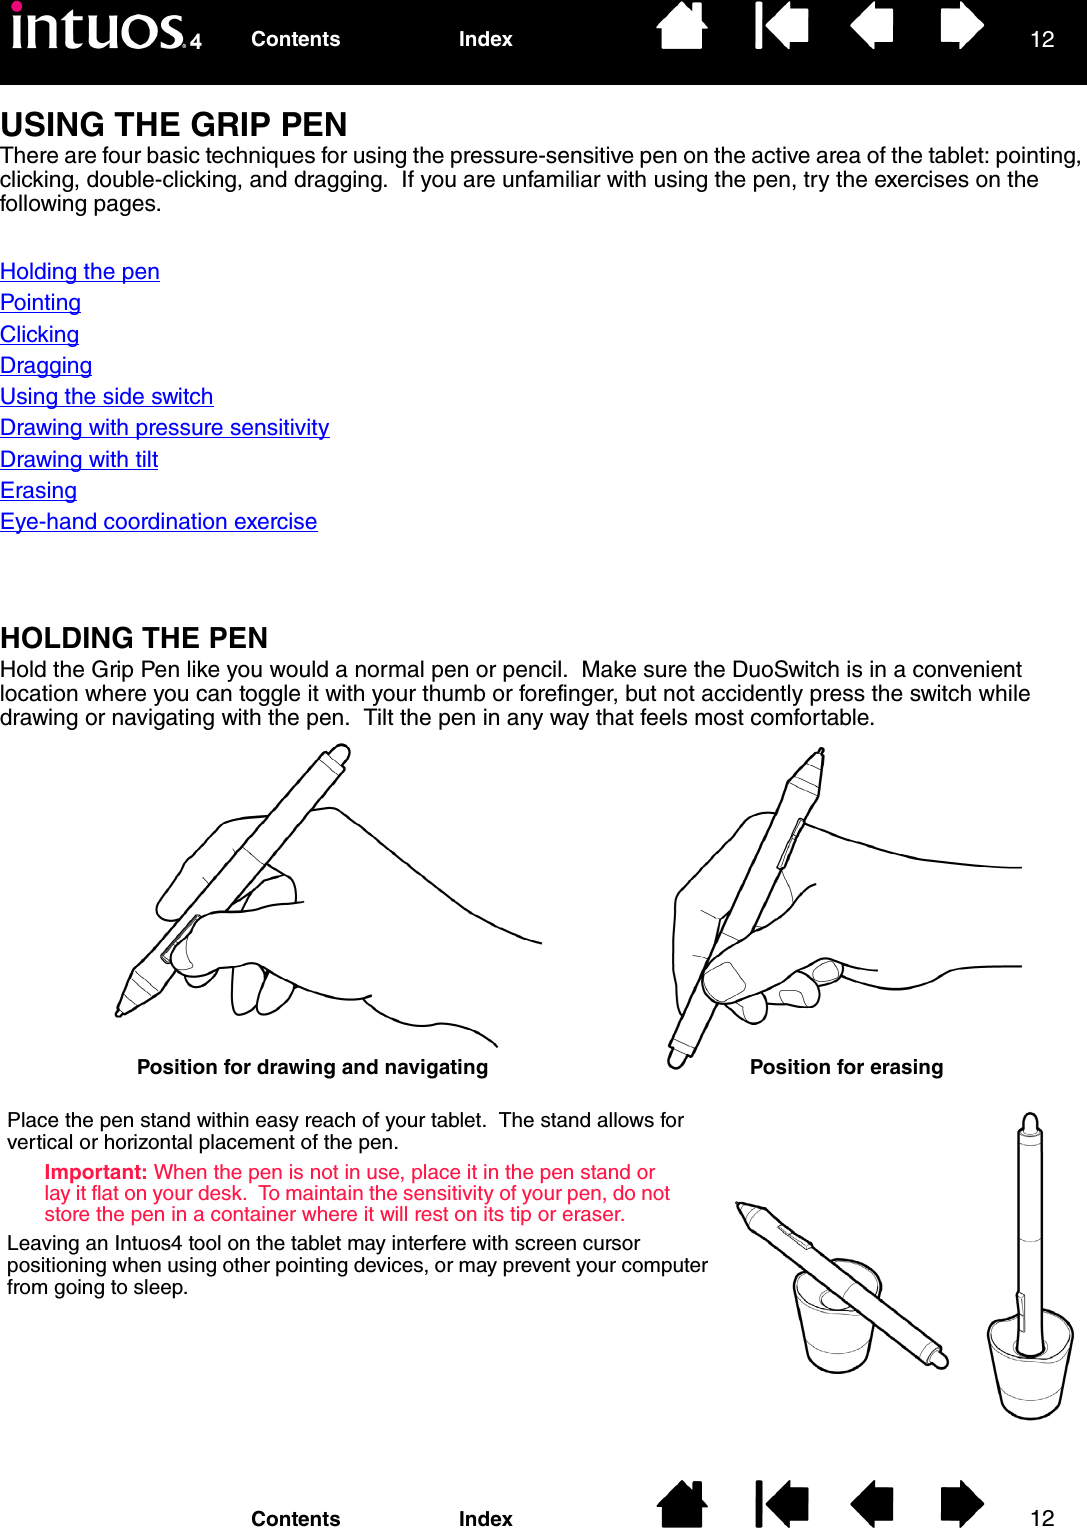 1212IndexContentsIndexContentsUSING THE GRIP PENThere are four basic techniques for using the pressure-sensitive pen on the active area of the tablet: pointing, clicking, double-clicking, and dragging.  If you are unfamiliar with using the pen, try the exercises on the following pages.Holding the penPointingClickingDraggingUsing the side switchDrawing with pressure sensitivityDrawing with tiltErasingEye-hand coordination exerciseHOLDING THE PENHold the Grip Pen like you would a normal pen or pencil.  Make sure the DuoSwitch is in a convenient location where you can toggle it with your thumb or forefinger, but not accidently press the switch while drawing or navigating with the pen.  Tilt the pen in any way that feels most comfortable.Position for drawing and navigating Position for erasingPlace the pen stand within easy reach of your tablet.  The stand allows for vertical or horizontal placement of the pen.Important: When the pen is not in use, place it in the pen stand or lay it flat on your desk.  To maintain the sensitivity of your pen, do not store the pen in a container where it will rest on its tip or eraser.Leaving an Intuos4 tool on the tablet may interfere with screen cursor positioning when using other pointing devices, or may prevent your computer from going to sleep.